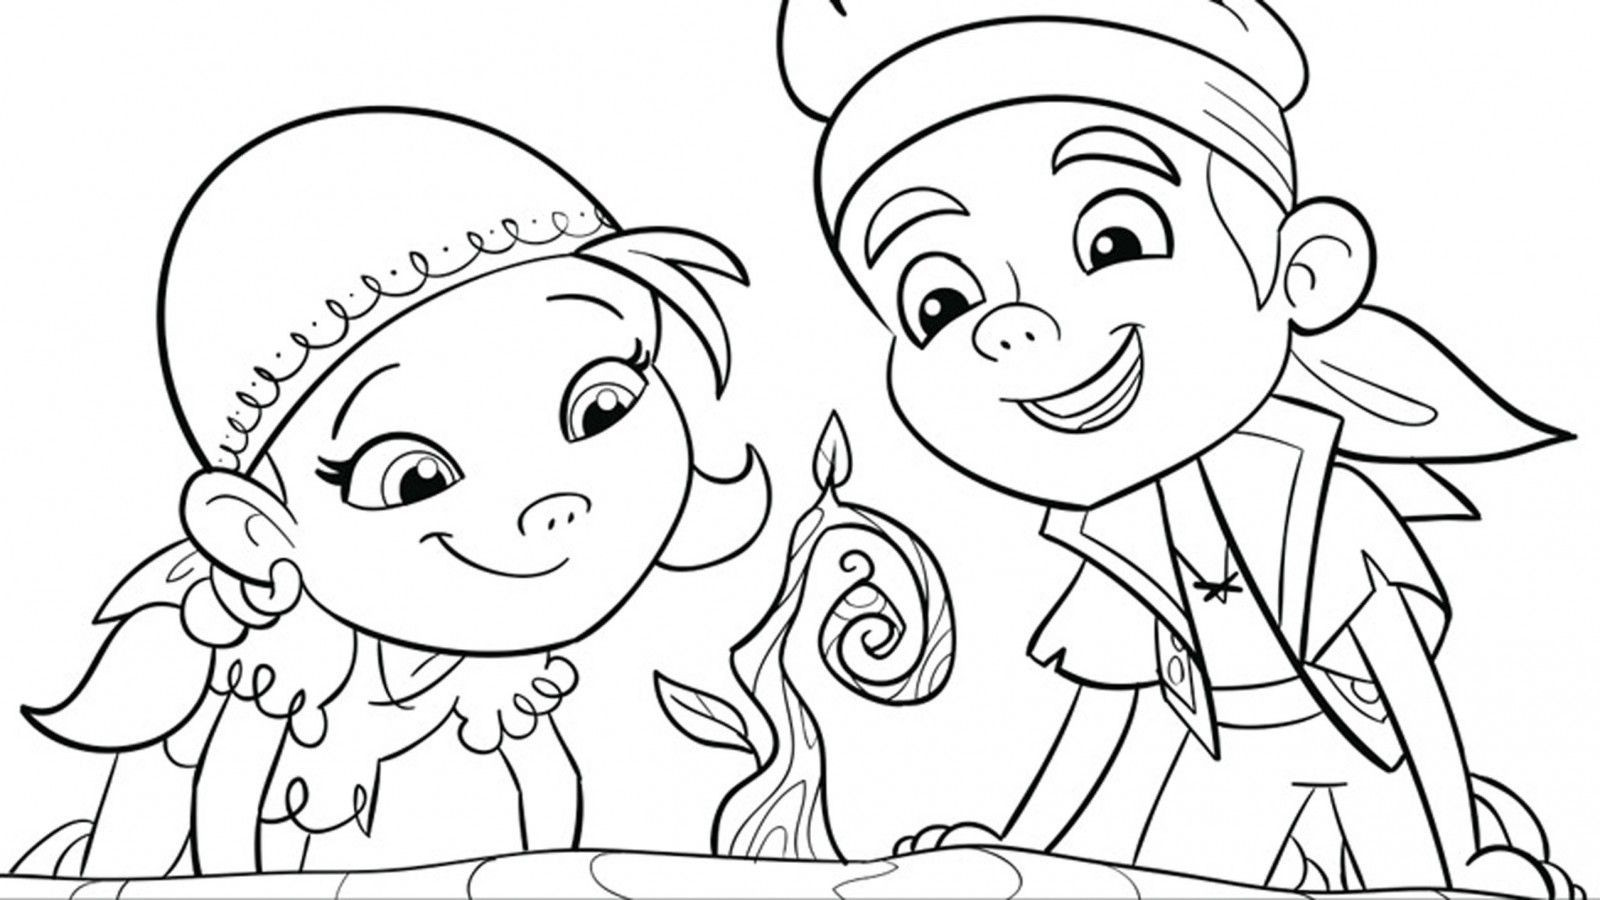 Boys Disney Coloring Pages
 disney coloring pages for